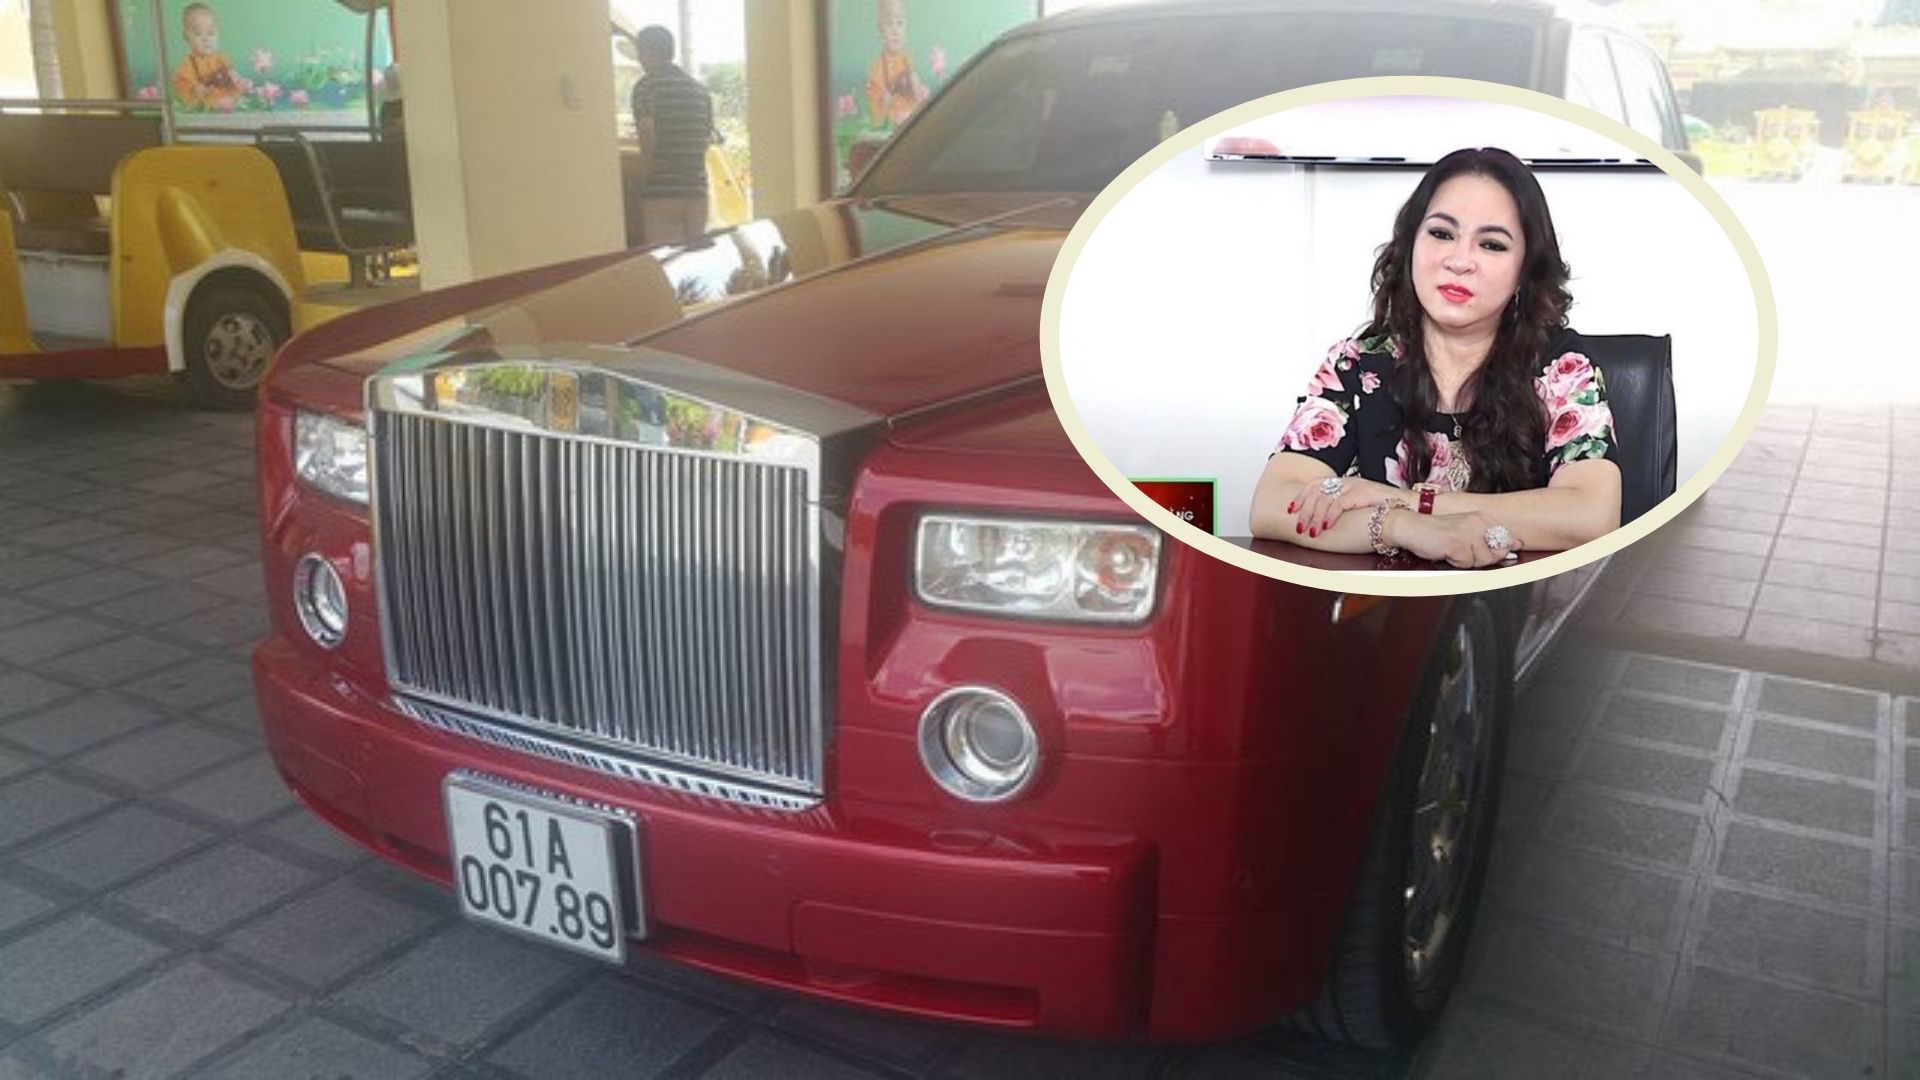 A series of Vietnamese giants who ride super-luxury cars Rolls-Royce have bad luck